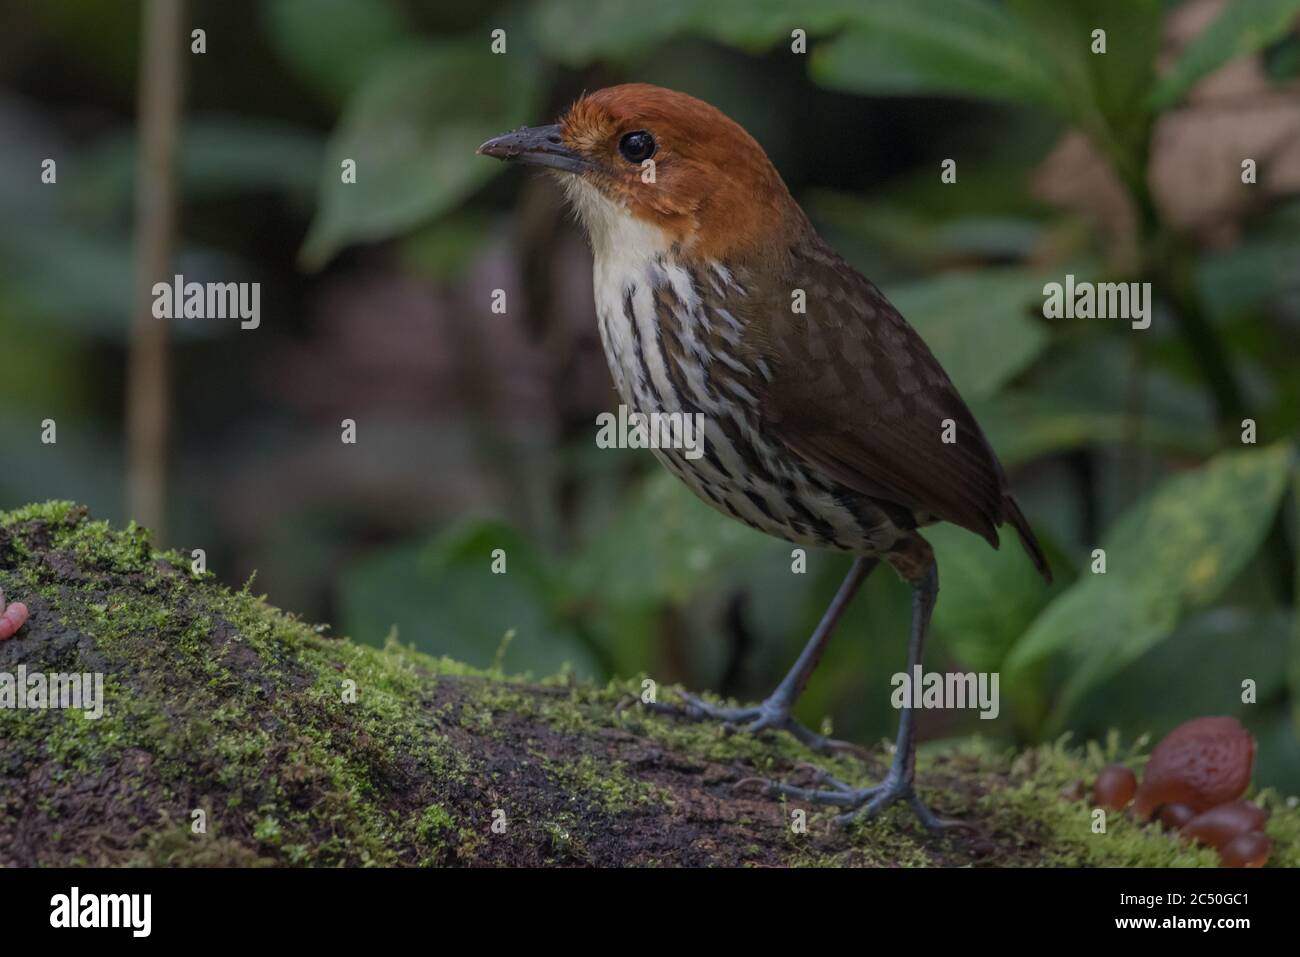 A chestnut crowned antpitta (Grallaria ruficapilla) a shy secretive bird from cloud forest in the Andes of South America. Stock Photo